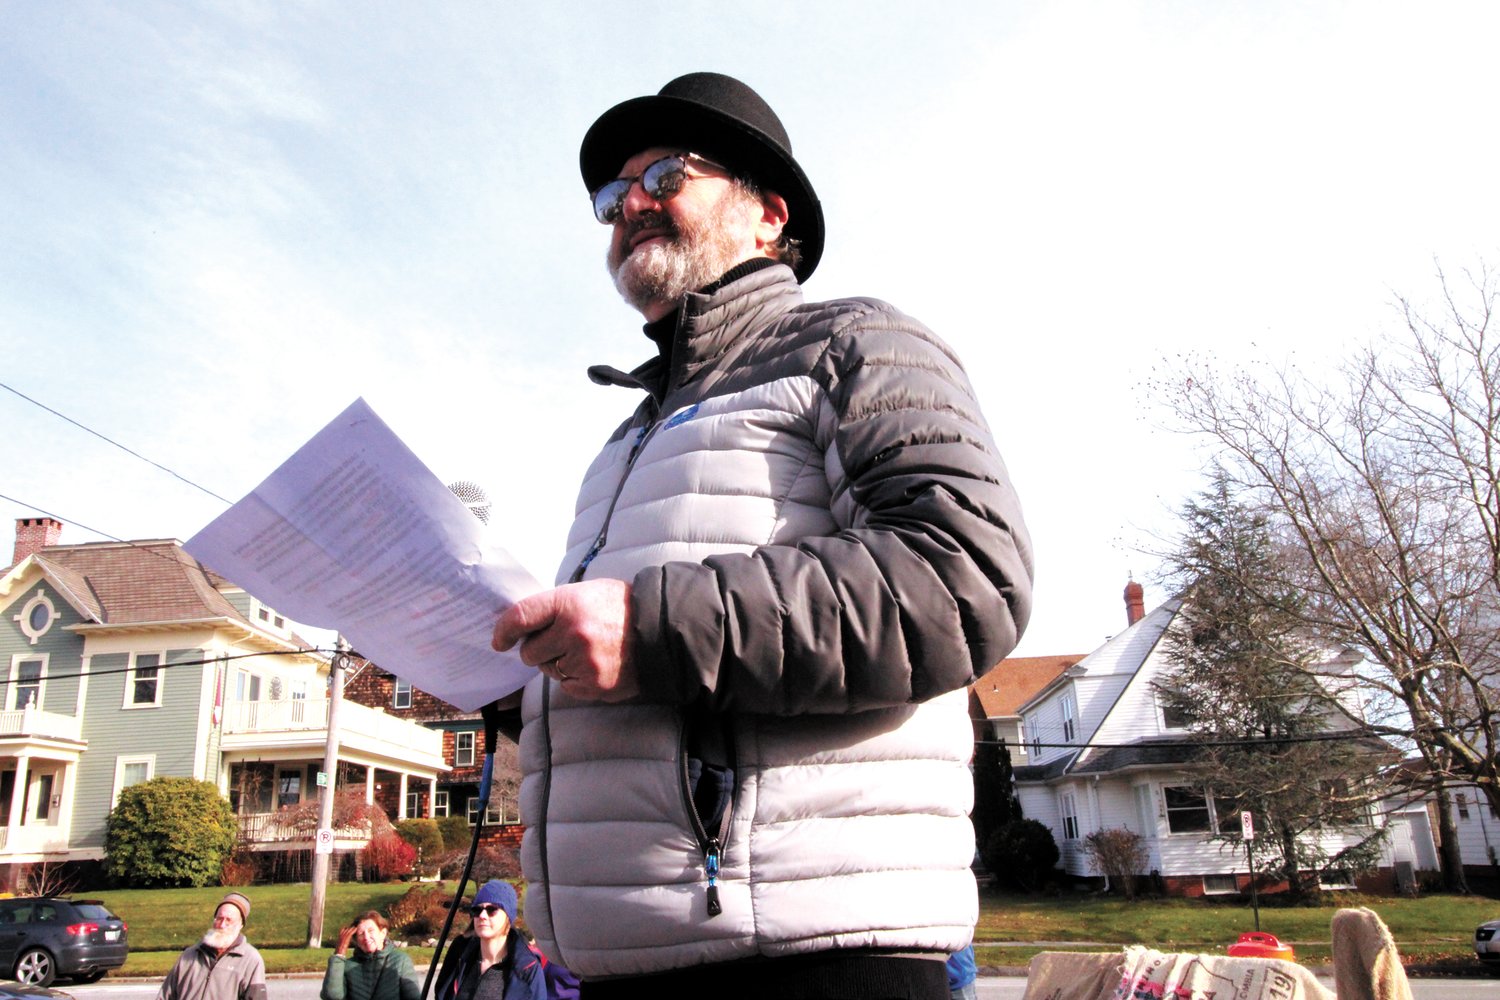 A NOTE FROM THE FILMMAKER: David Goldenberg, who formed the idea for the sculpture and created a supplementary film, spoke at the Dec. 4 unveiling. (Herald photo)